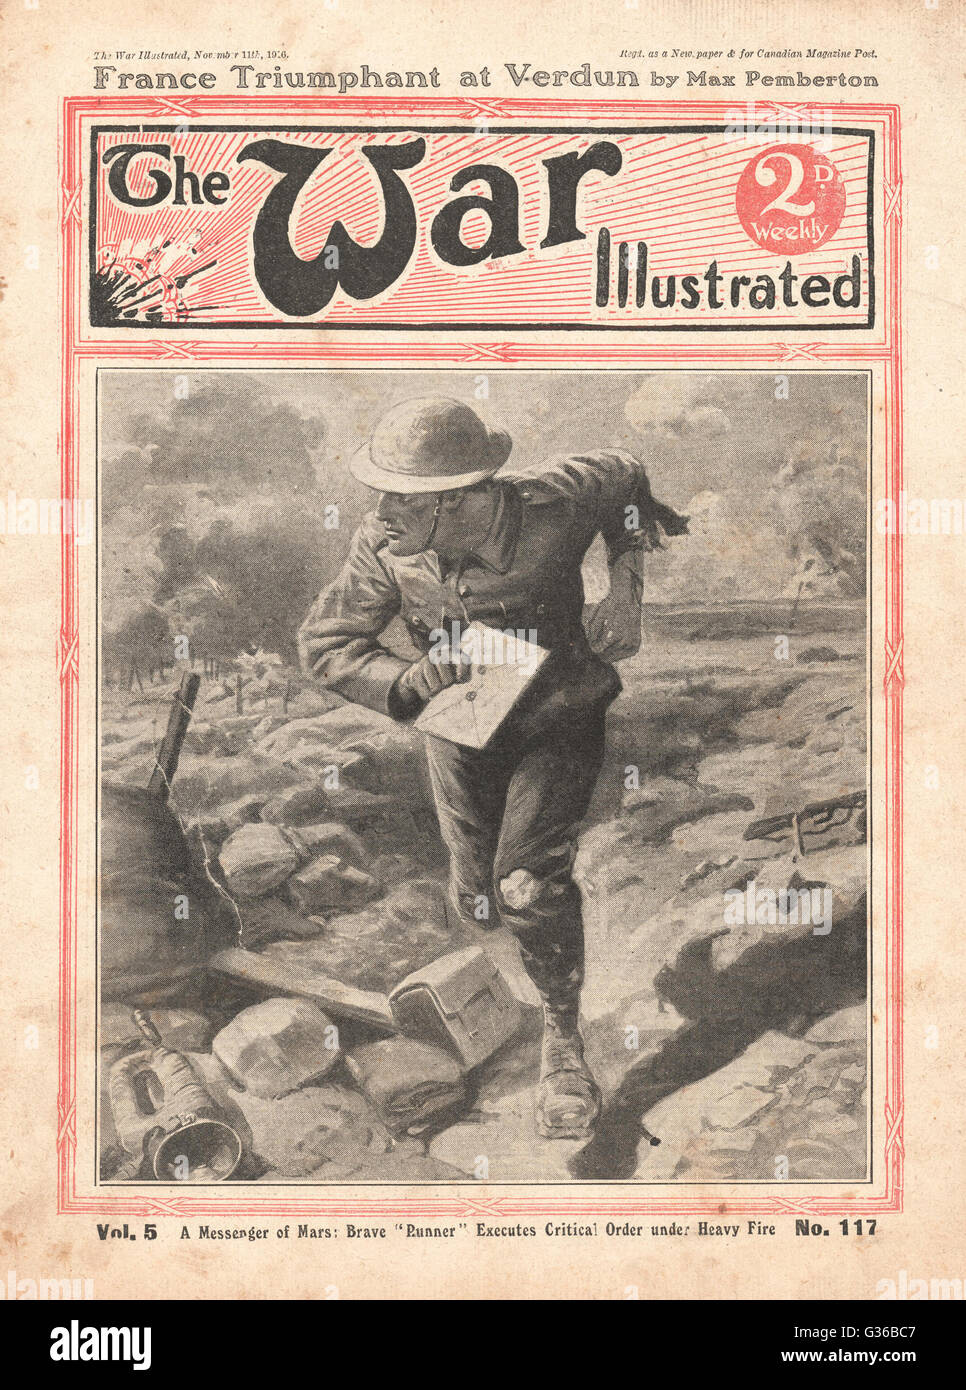 1916 The War Illustrated Messenger under heavy fire Stock Photo